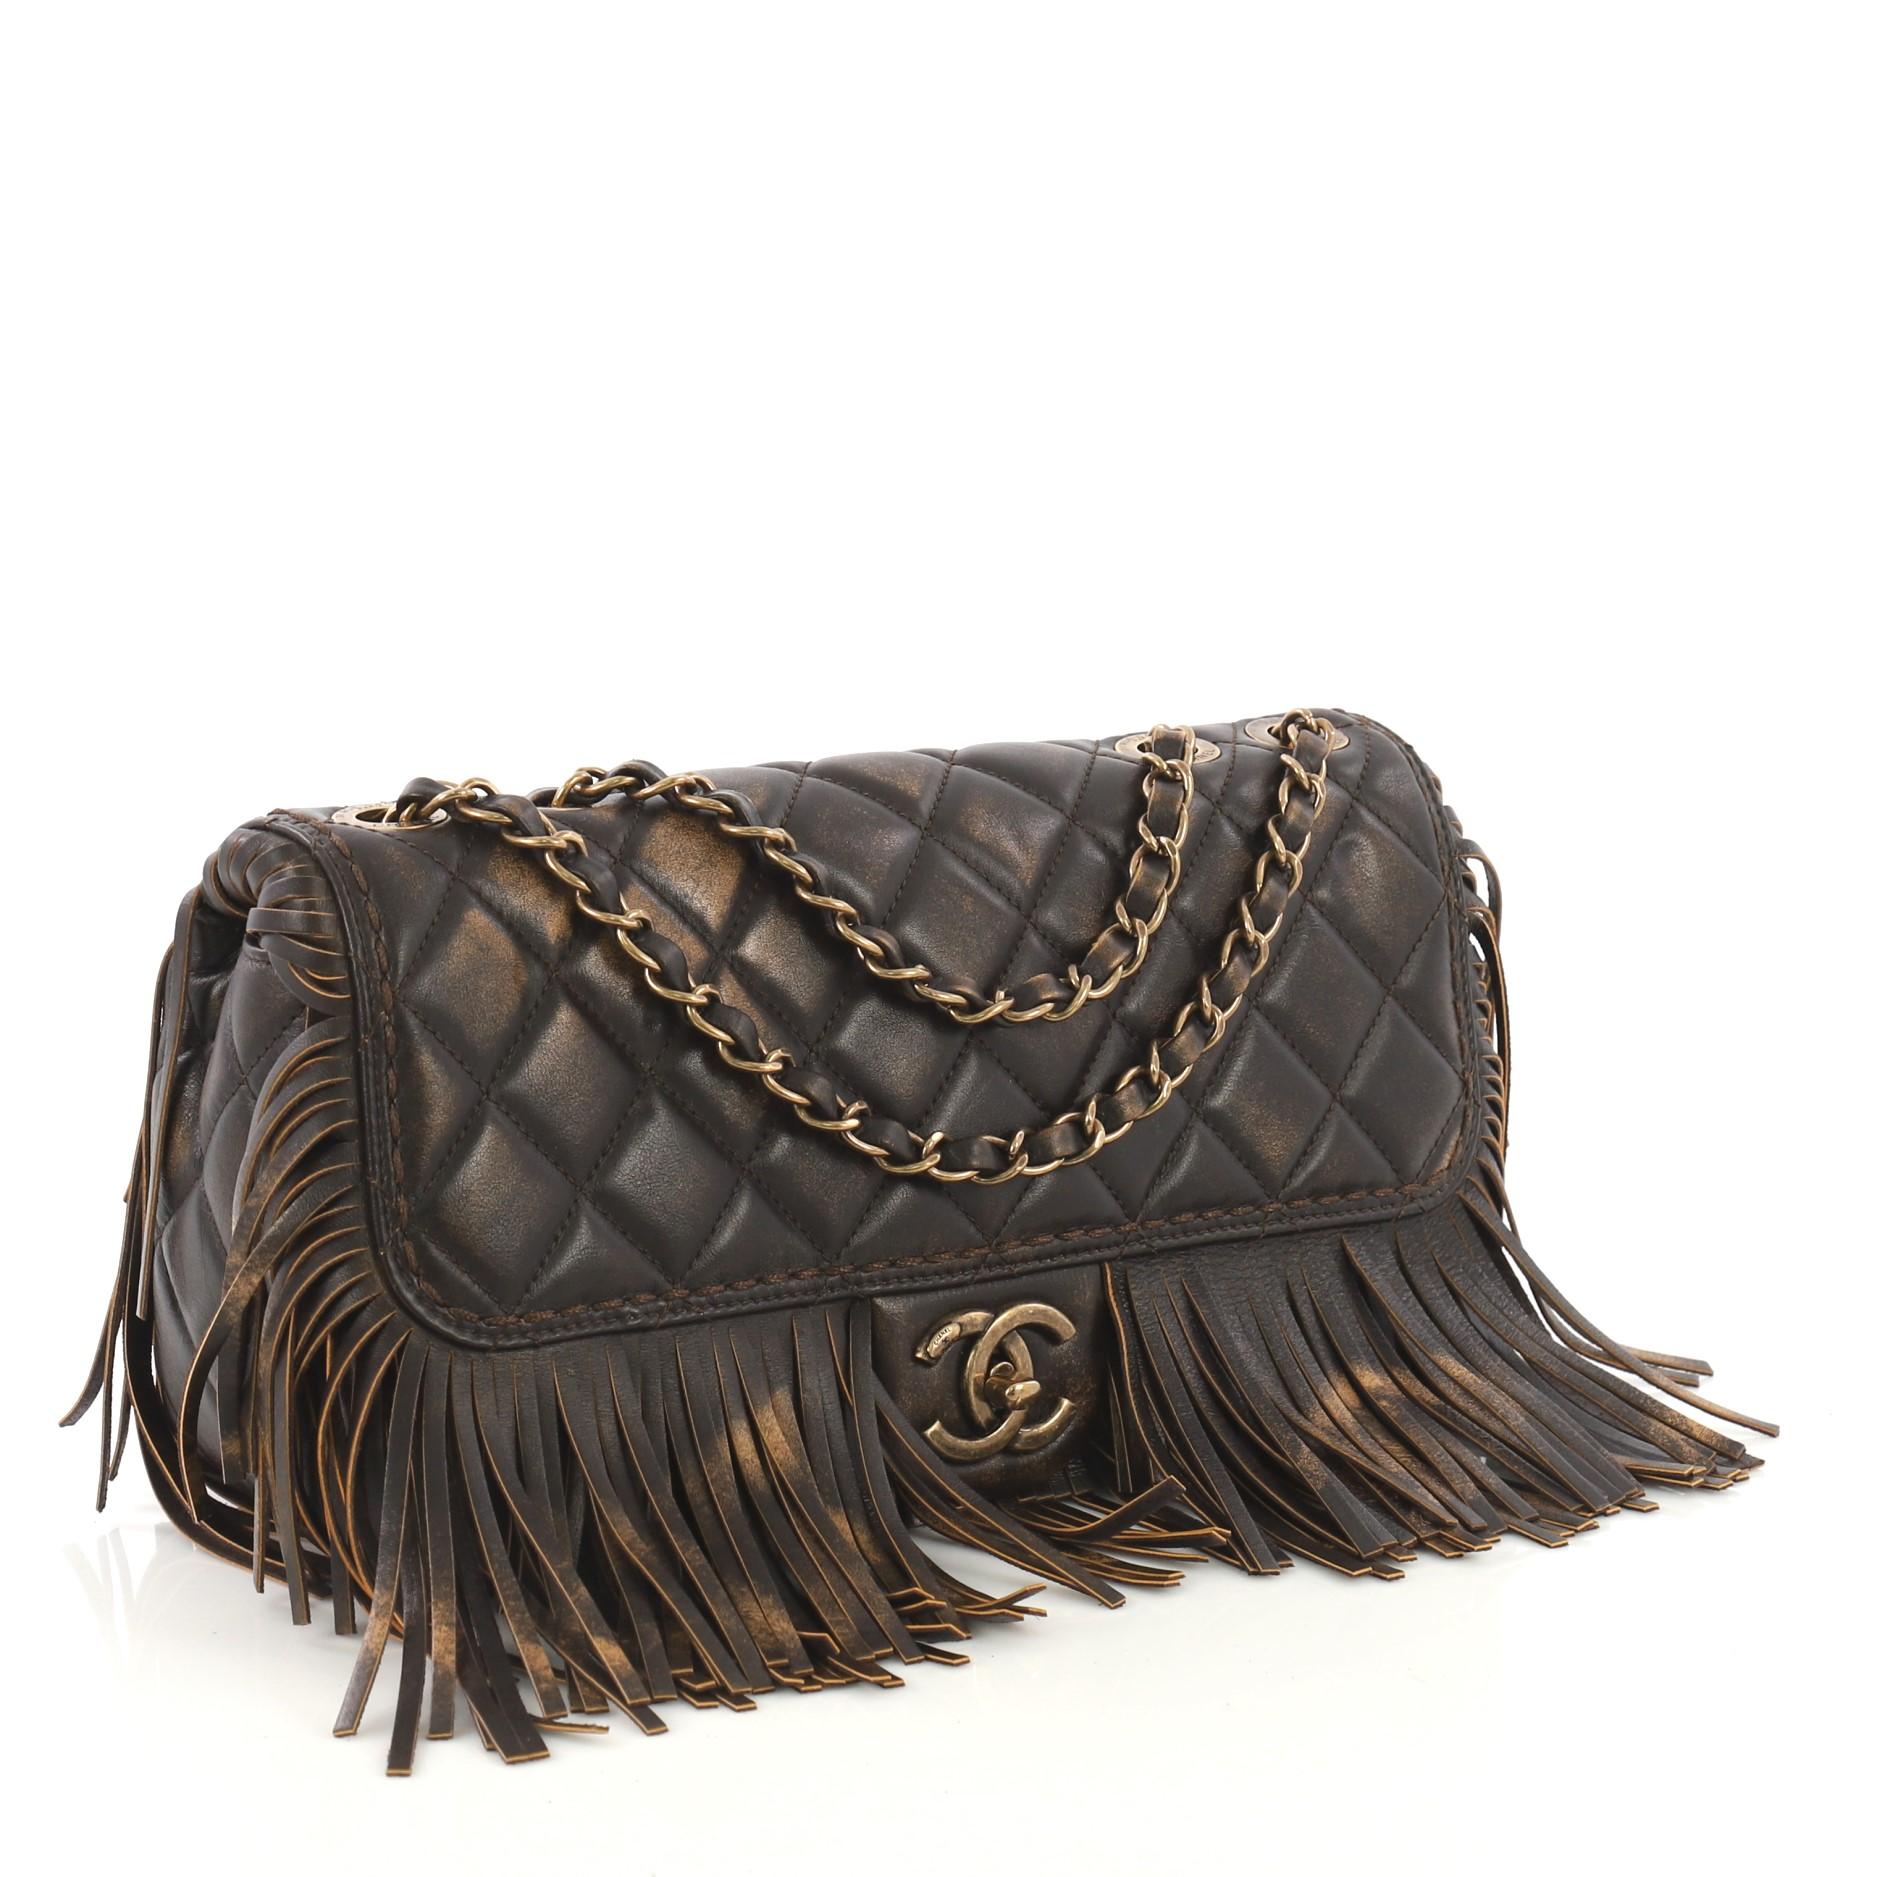 This Chanel Paris-Dallas Fringe Flap Bag Quilted Leather, crafted from brown quilted leather, features woven-in leather chain straps, frontal flap, fringe detailing, and aged gold-tone hardware. Its CC turn-lock closure opens to a burgundy fabric